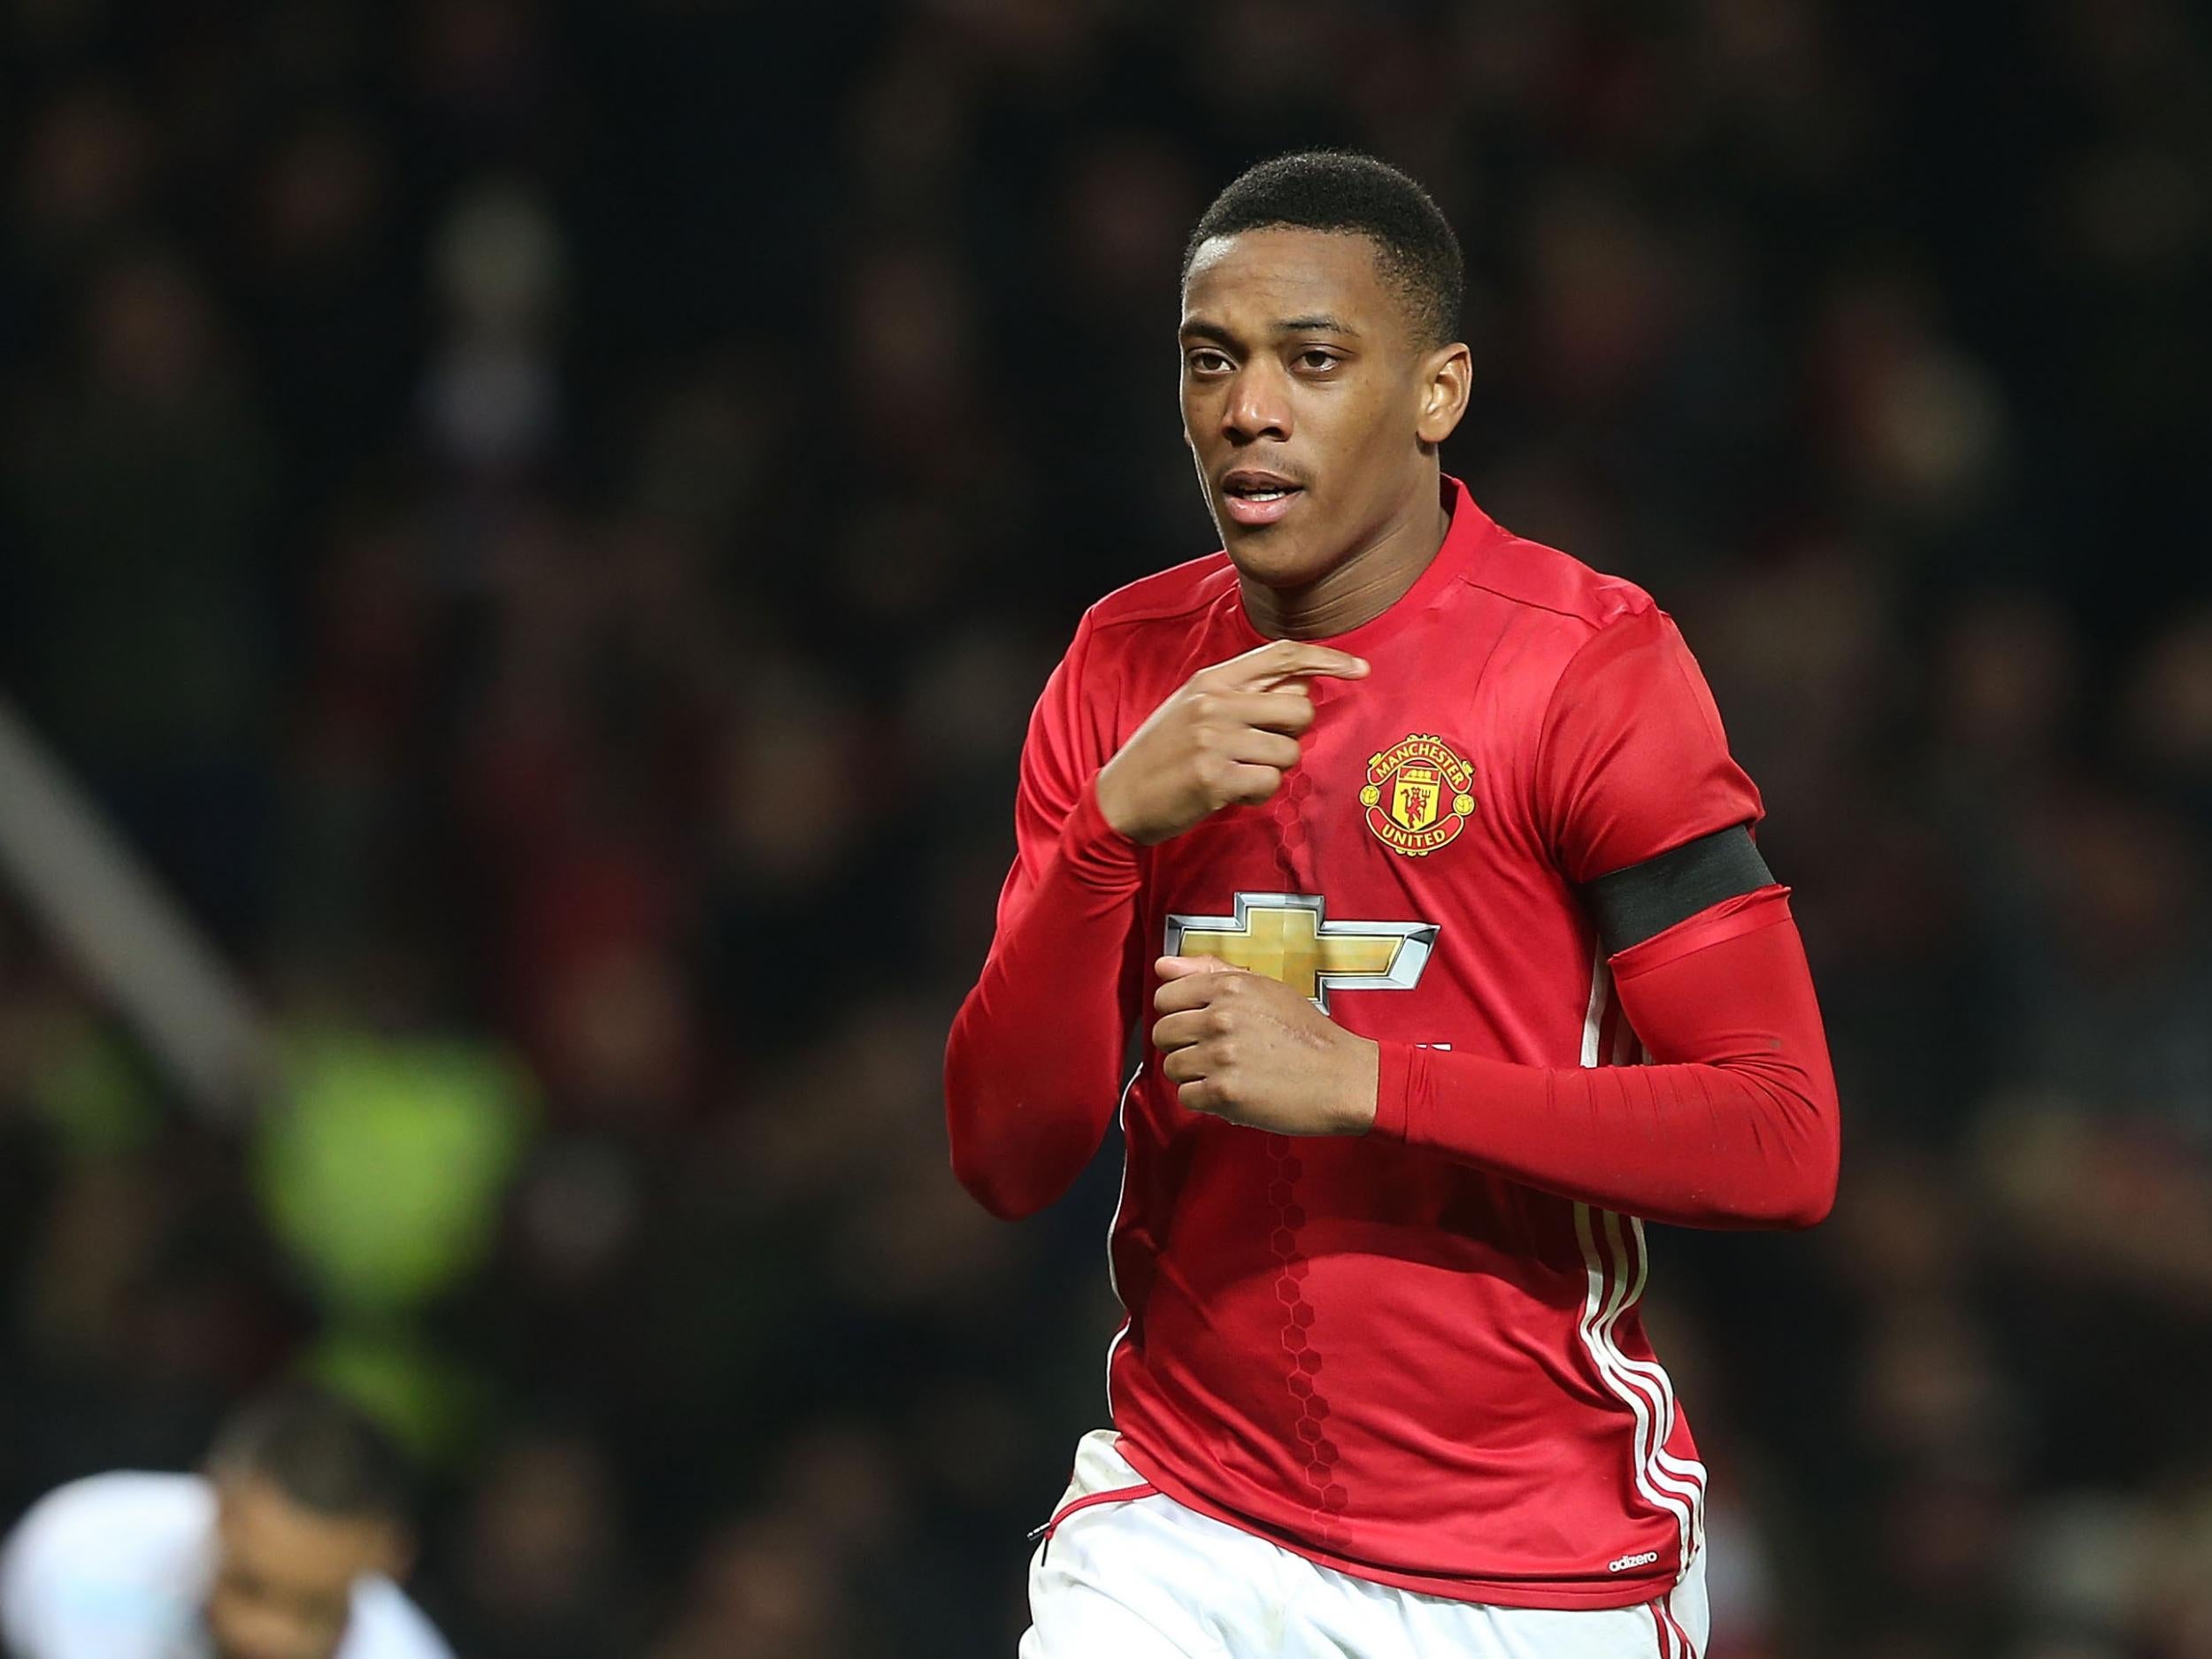 Martial has failed to hit the heights of last season